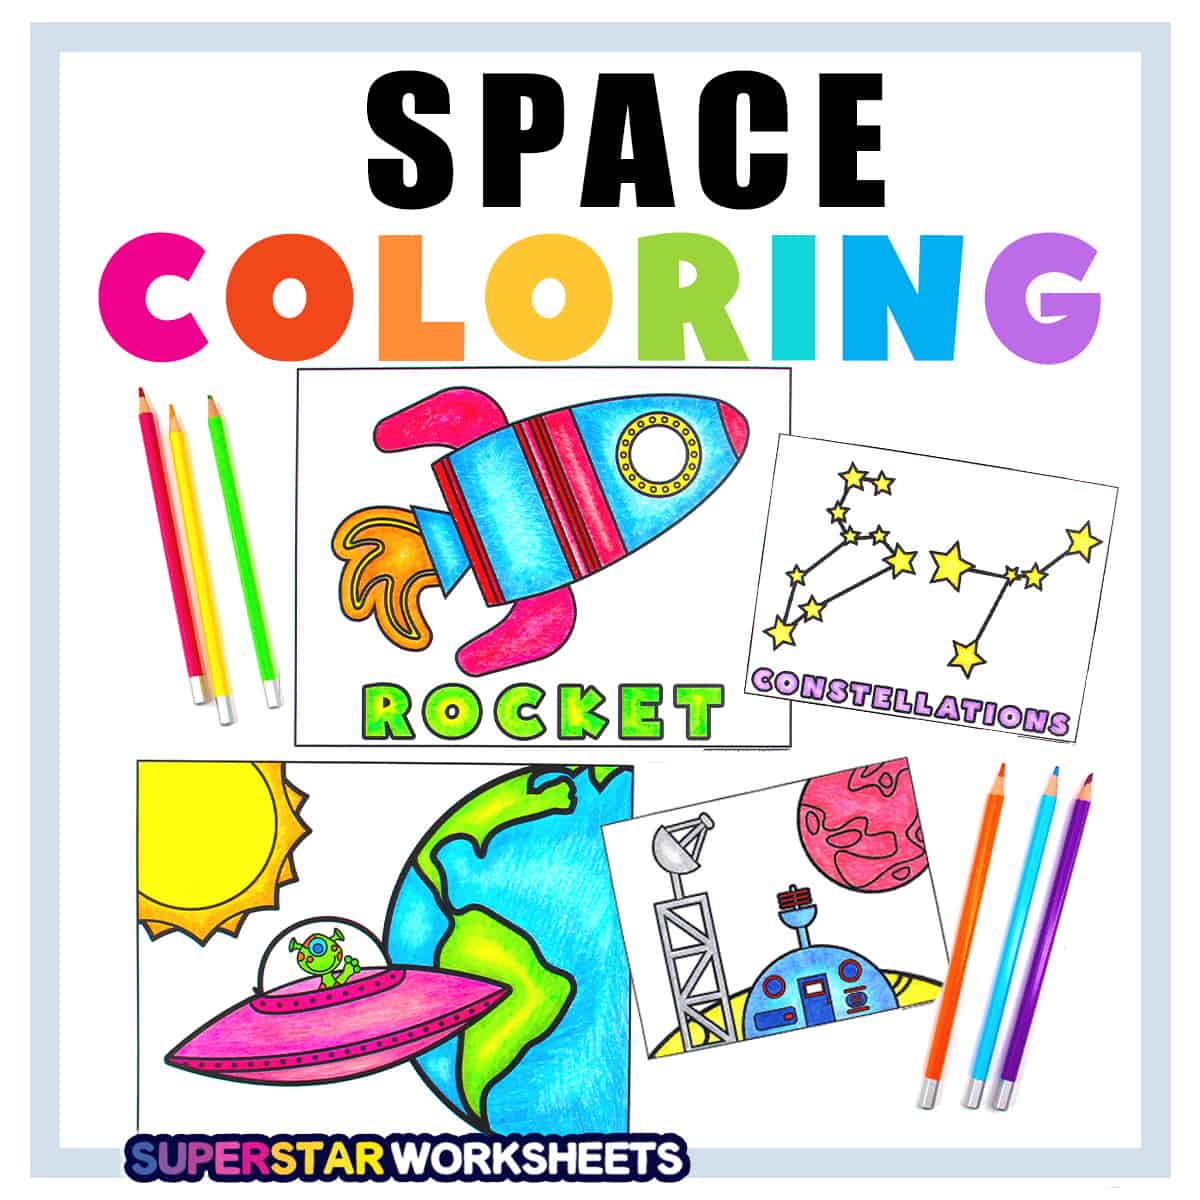 Outer Space Coloring Pages for Kids: Free Printable Coloring Pages